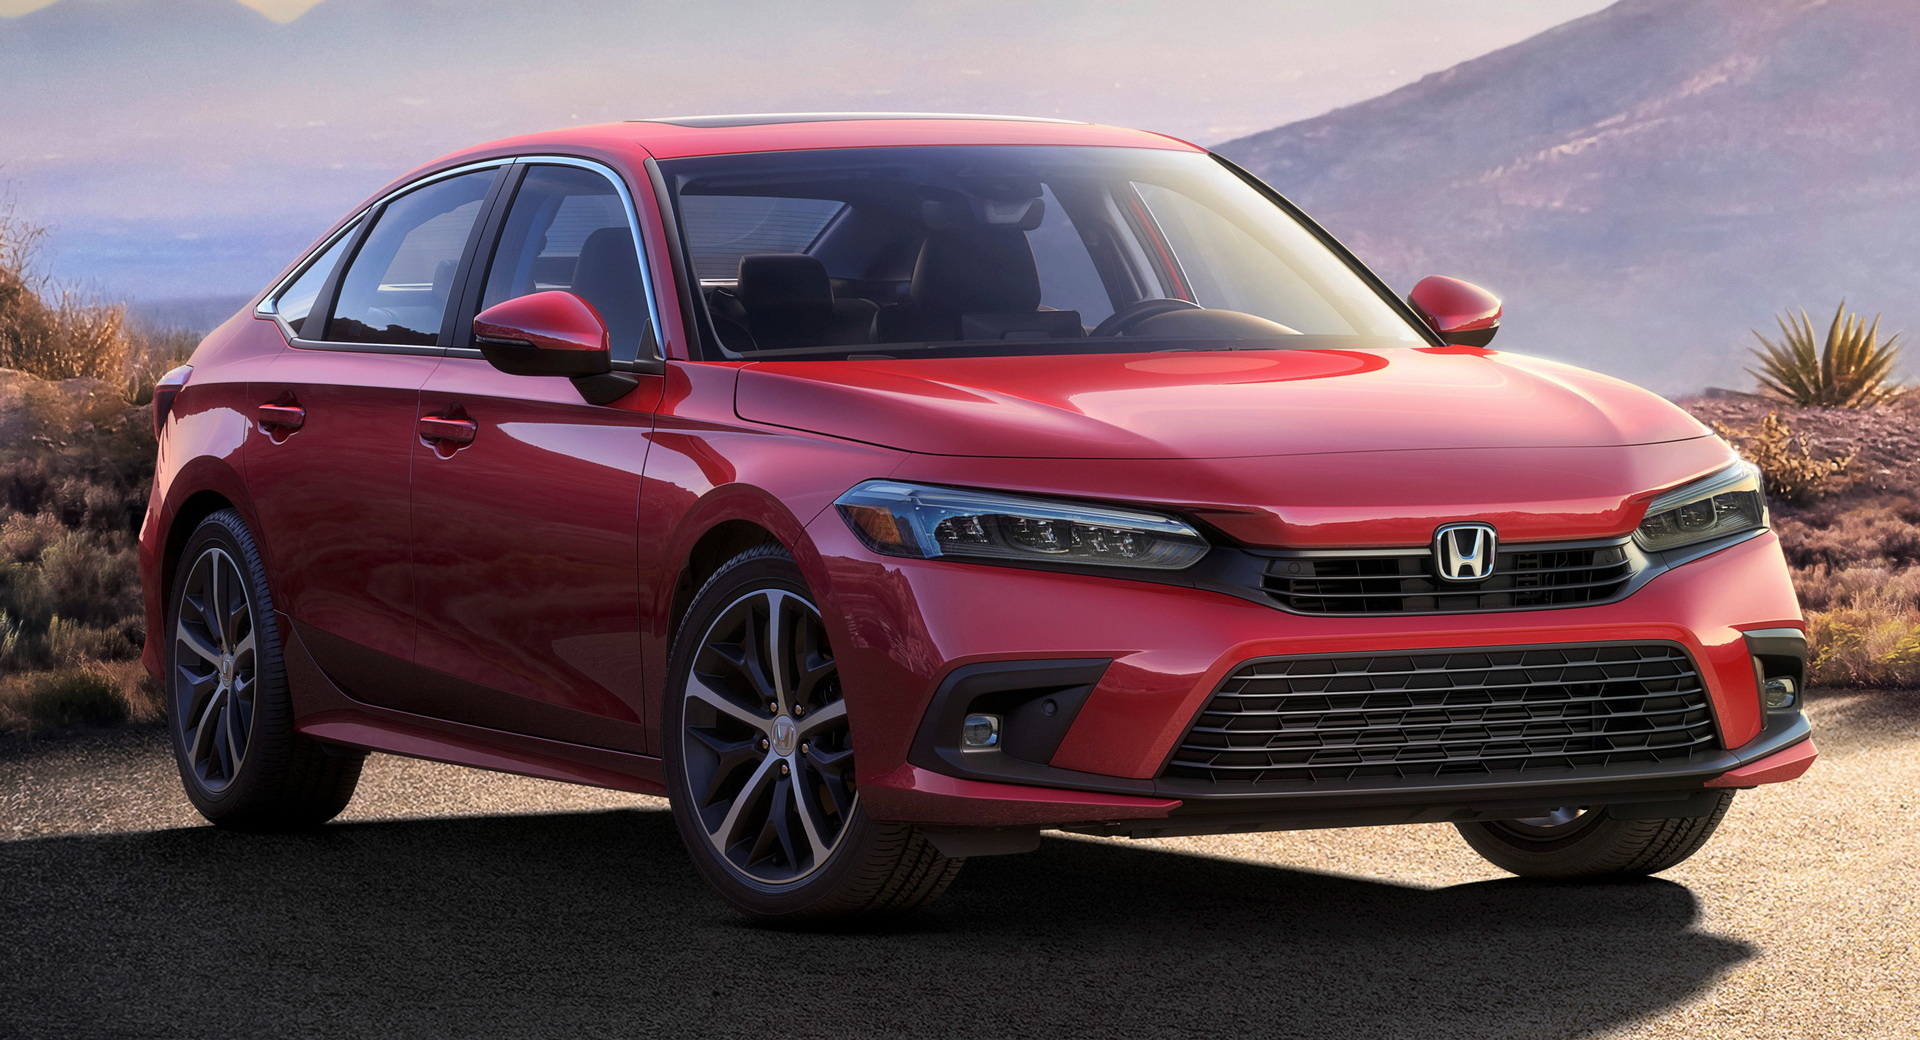 What You Can Expect From the 2022 Honda Civic